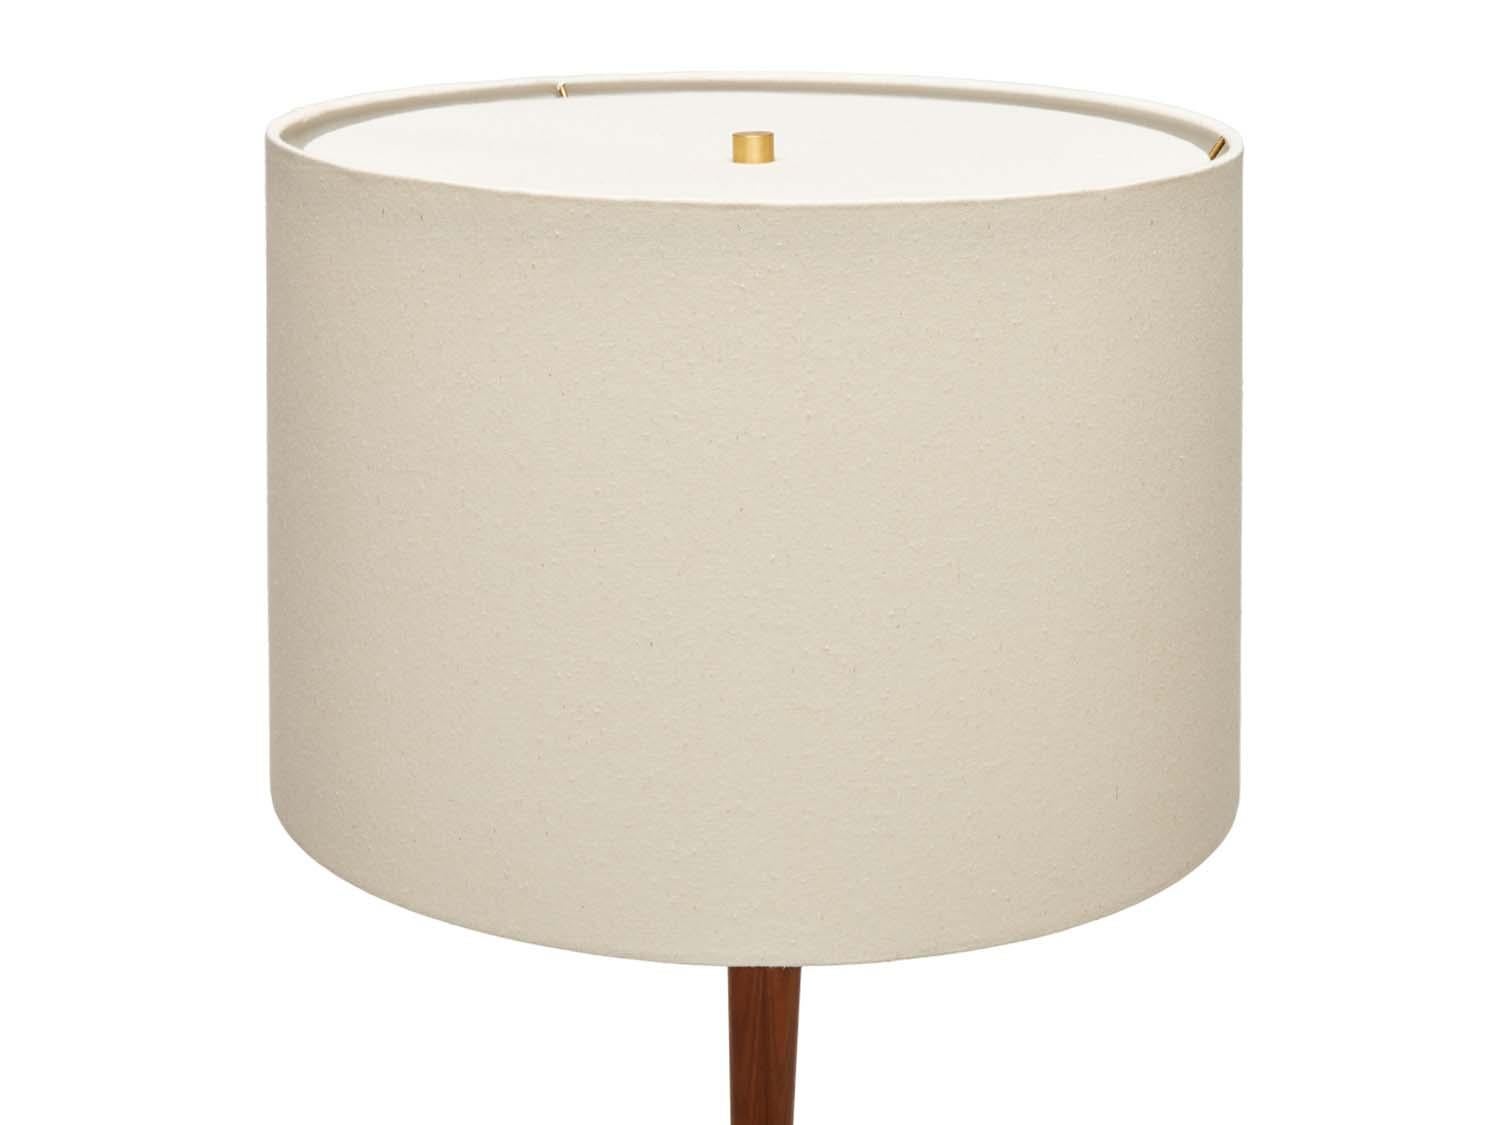 The El Monte lamp is made from turned solid American walnut or white oak with a brass knuckle. The drum shade is linen and includes a diffuser.

The Lawson-Fenning Collection is designed and handmade in Los Angeles, California.
Message us to find